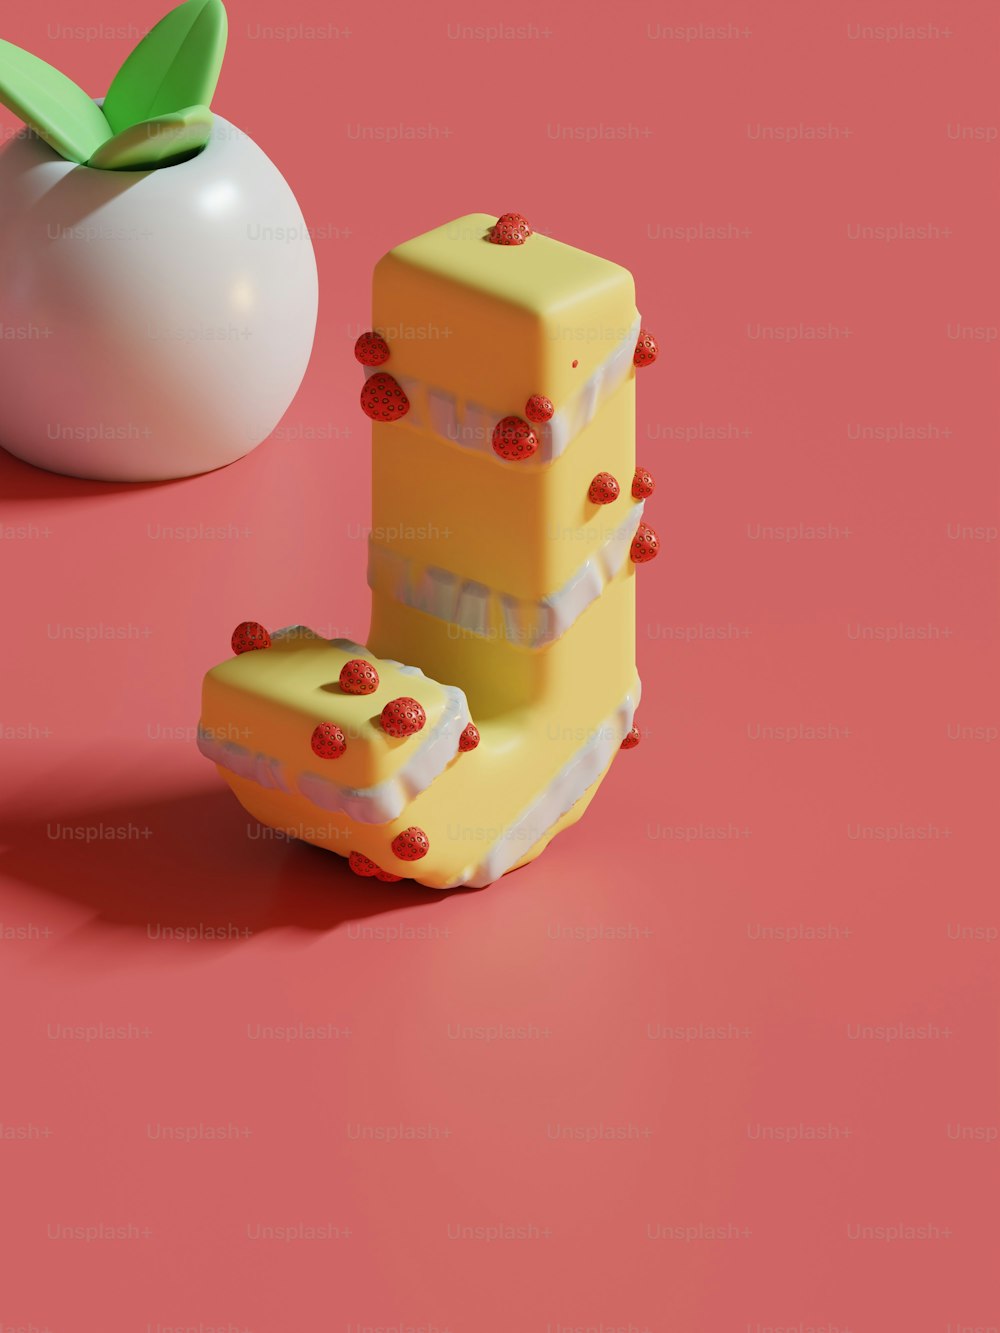 a piece of cake next to an apple on a pink surface